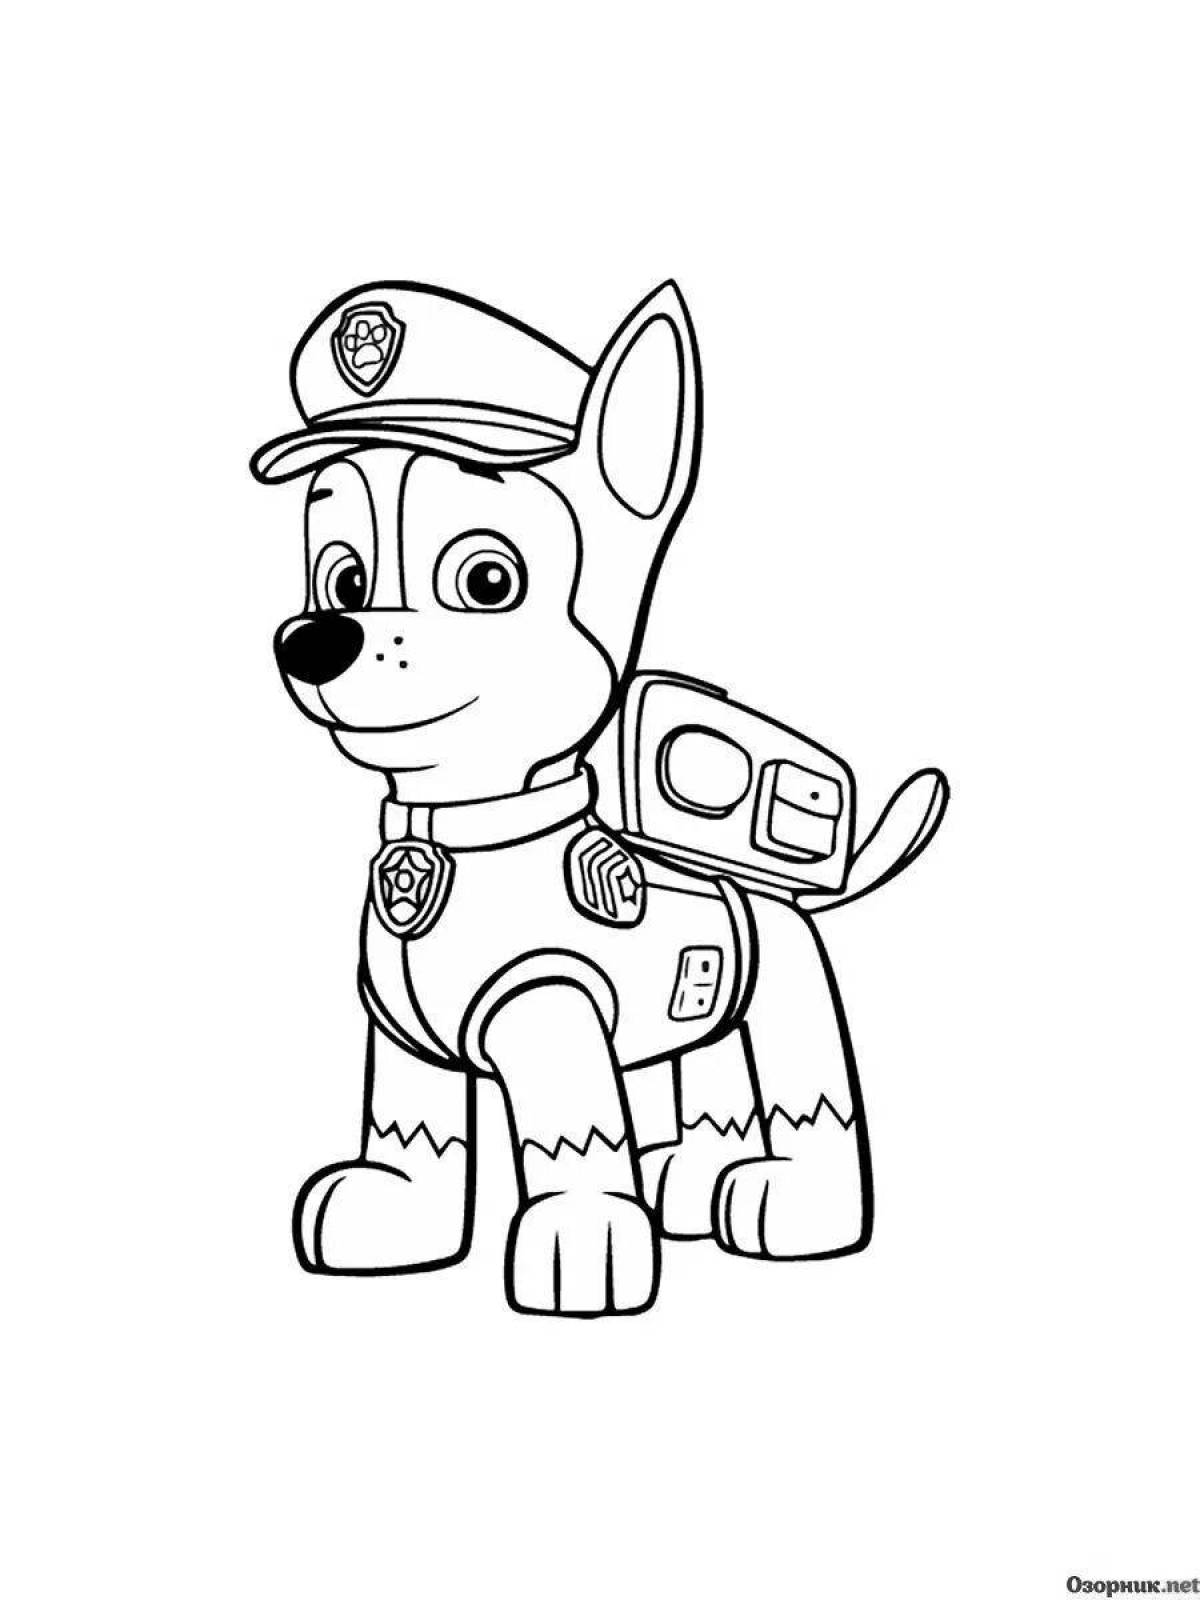 Fast racing car coloring page